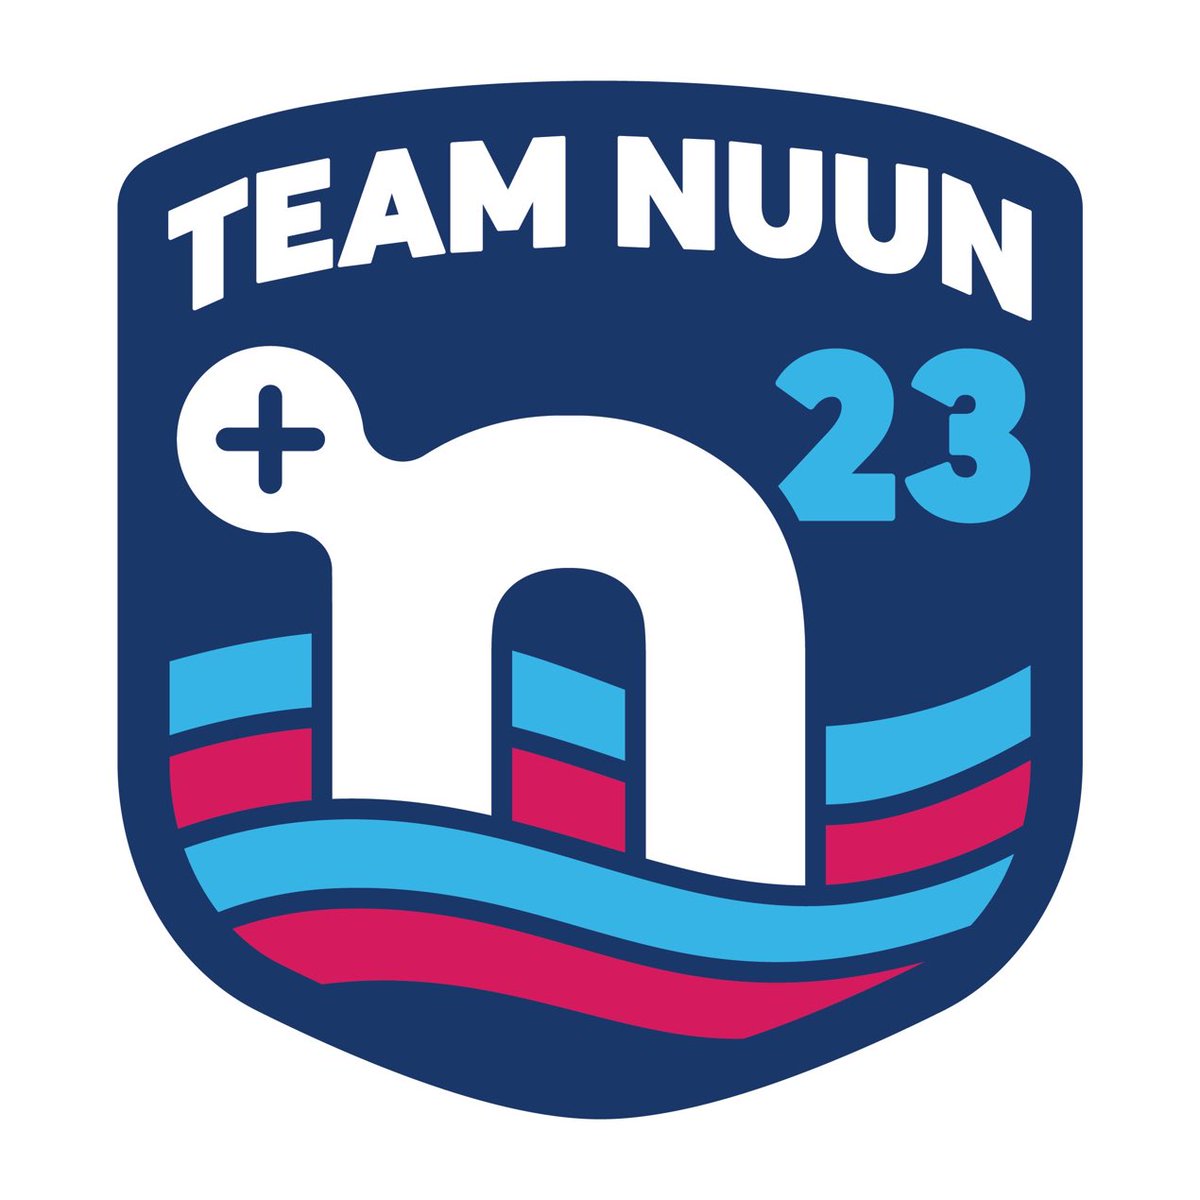 Excited to be with ⁦@nuunhydration⁩ and #teamnuun for another year! #nuunlife